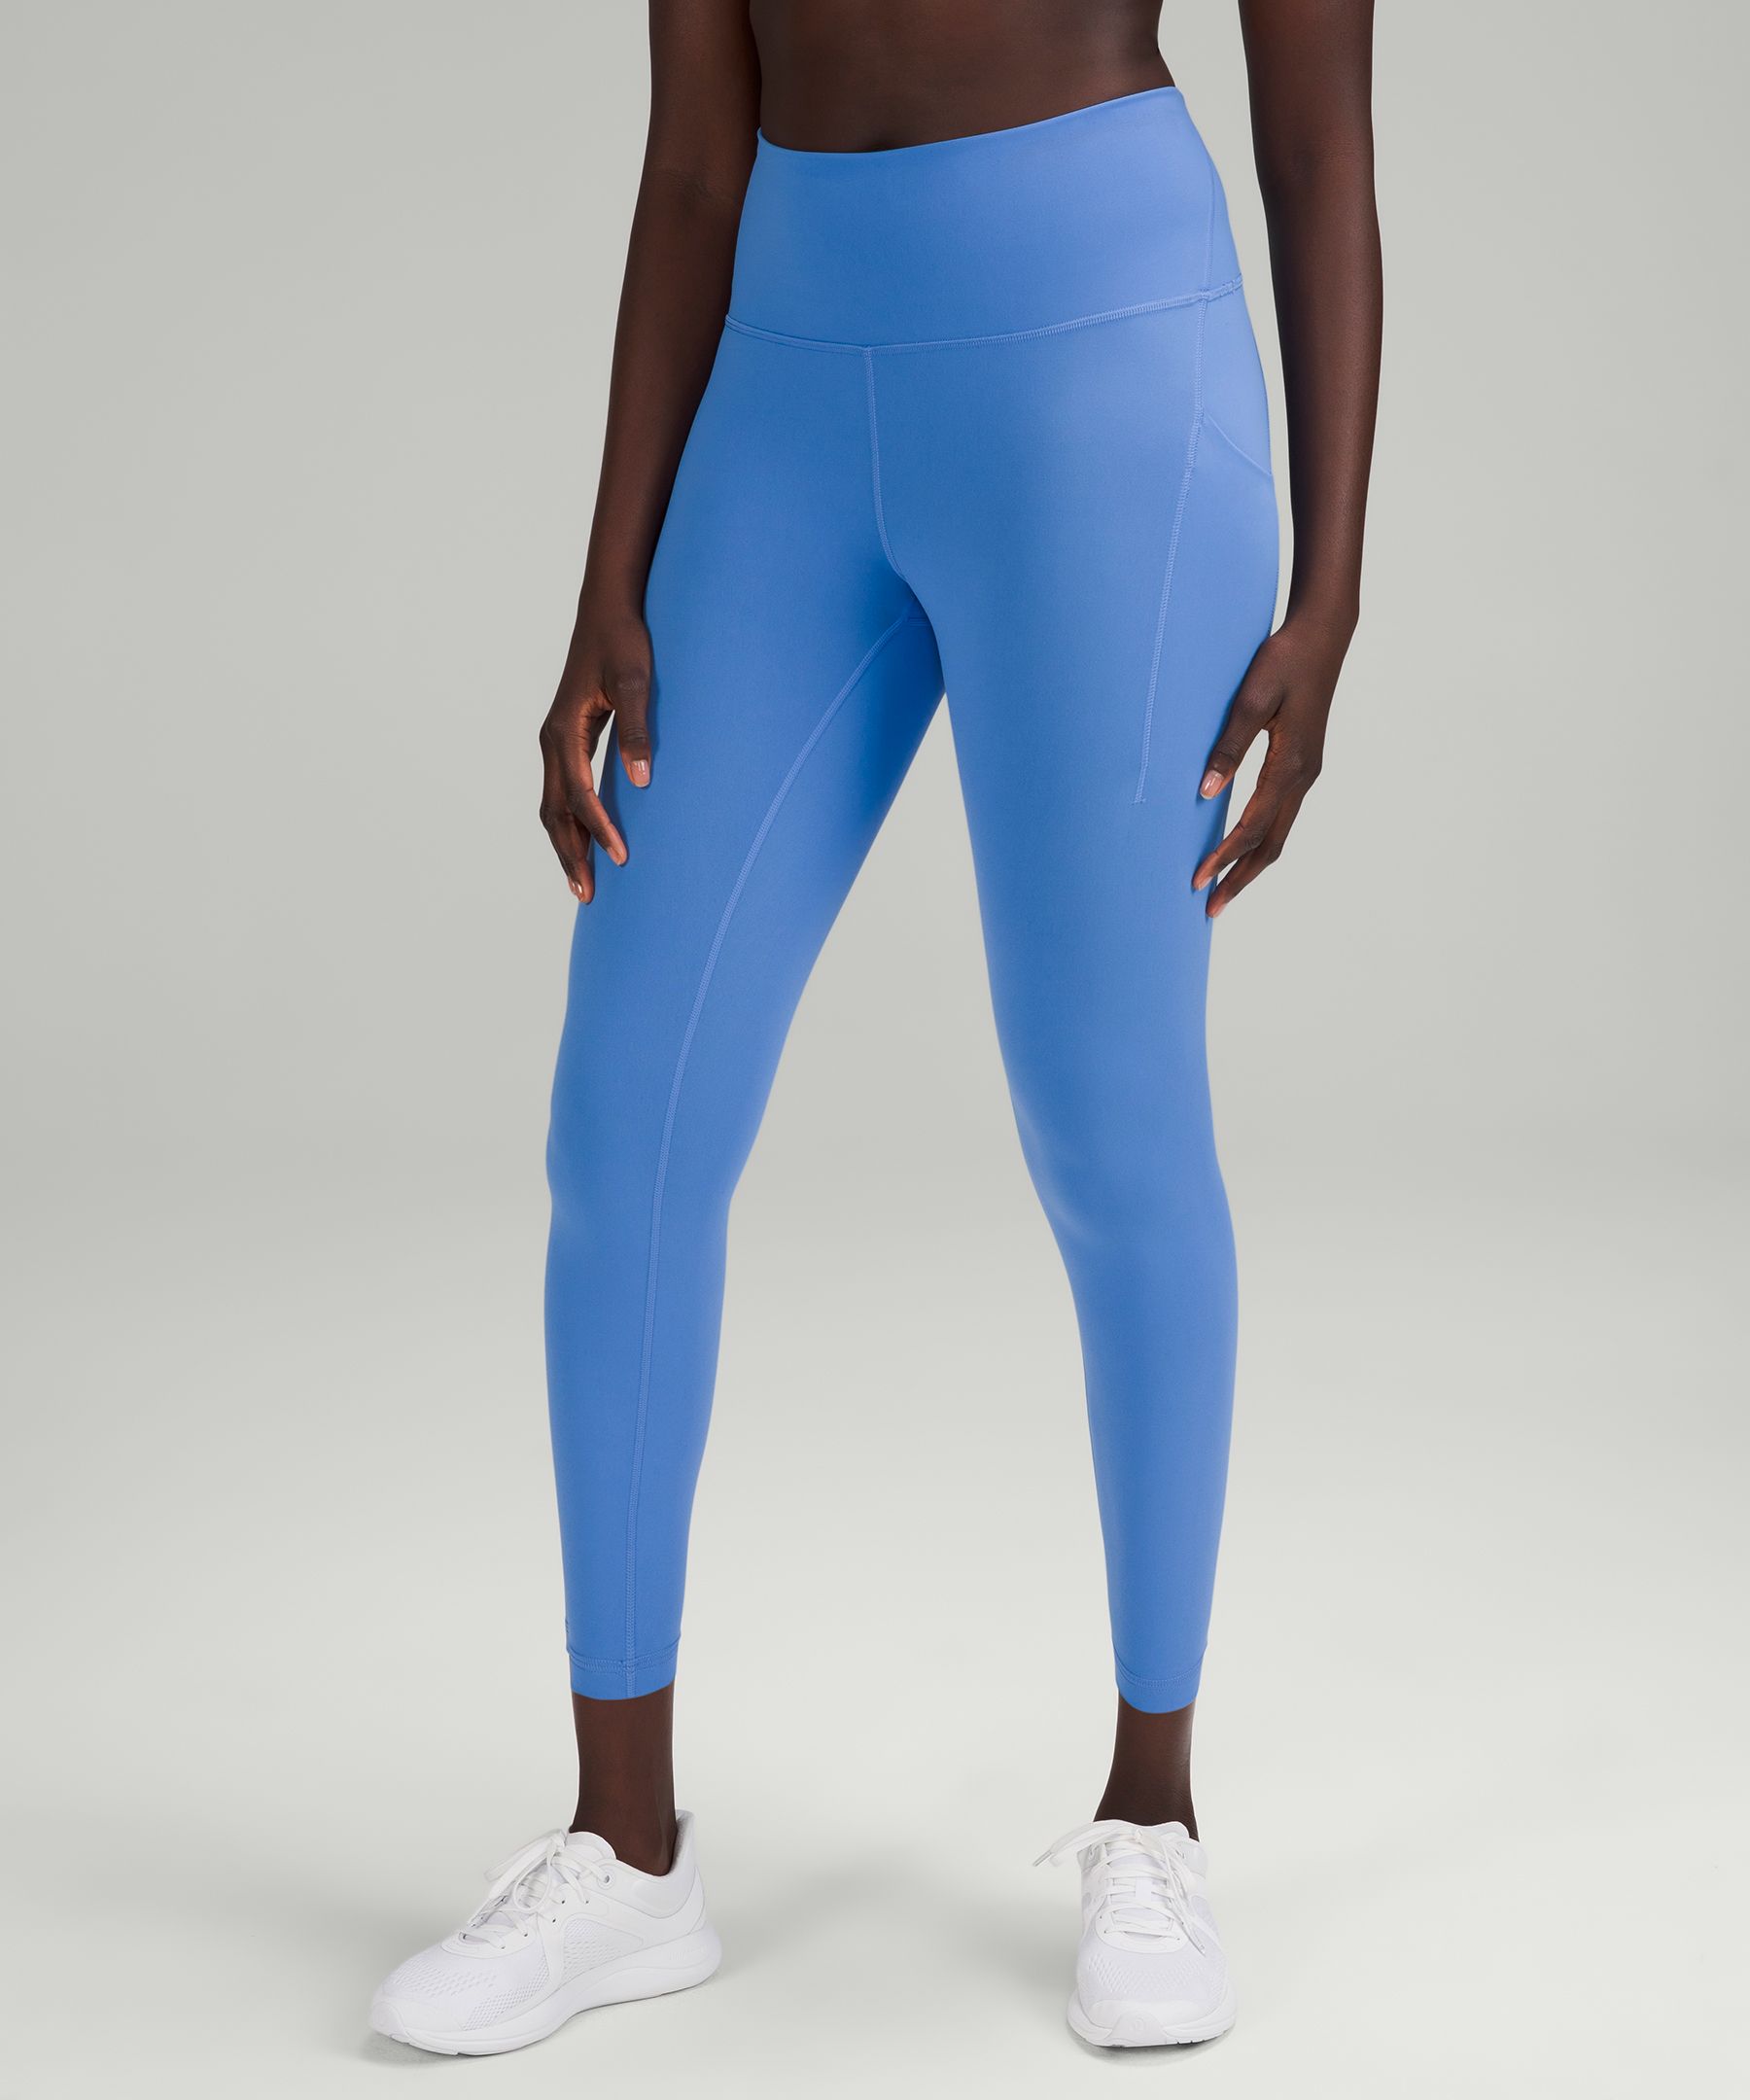 Cyber Monday 驚喜上新！Lululemon Wunder Train High-Rise Tight with Pockets 25 尼羅藍上新